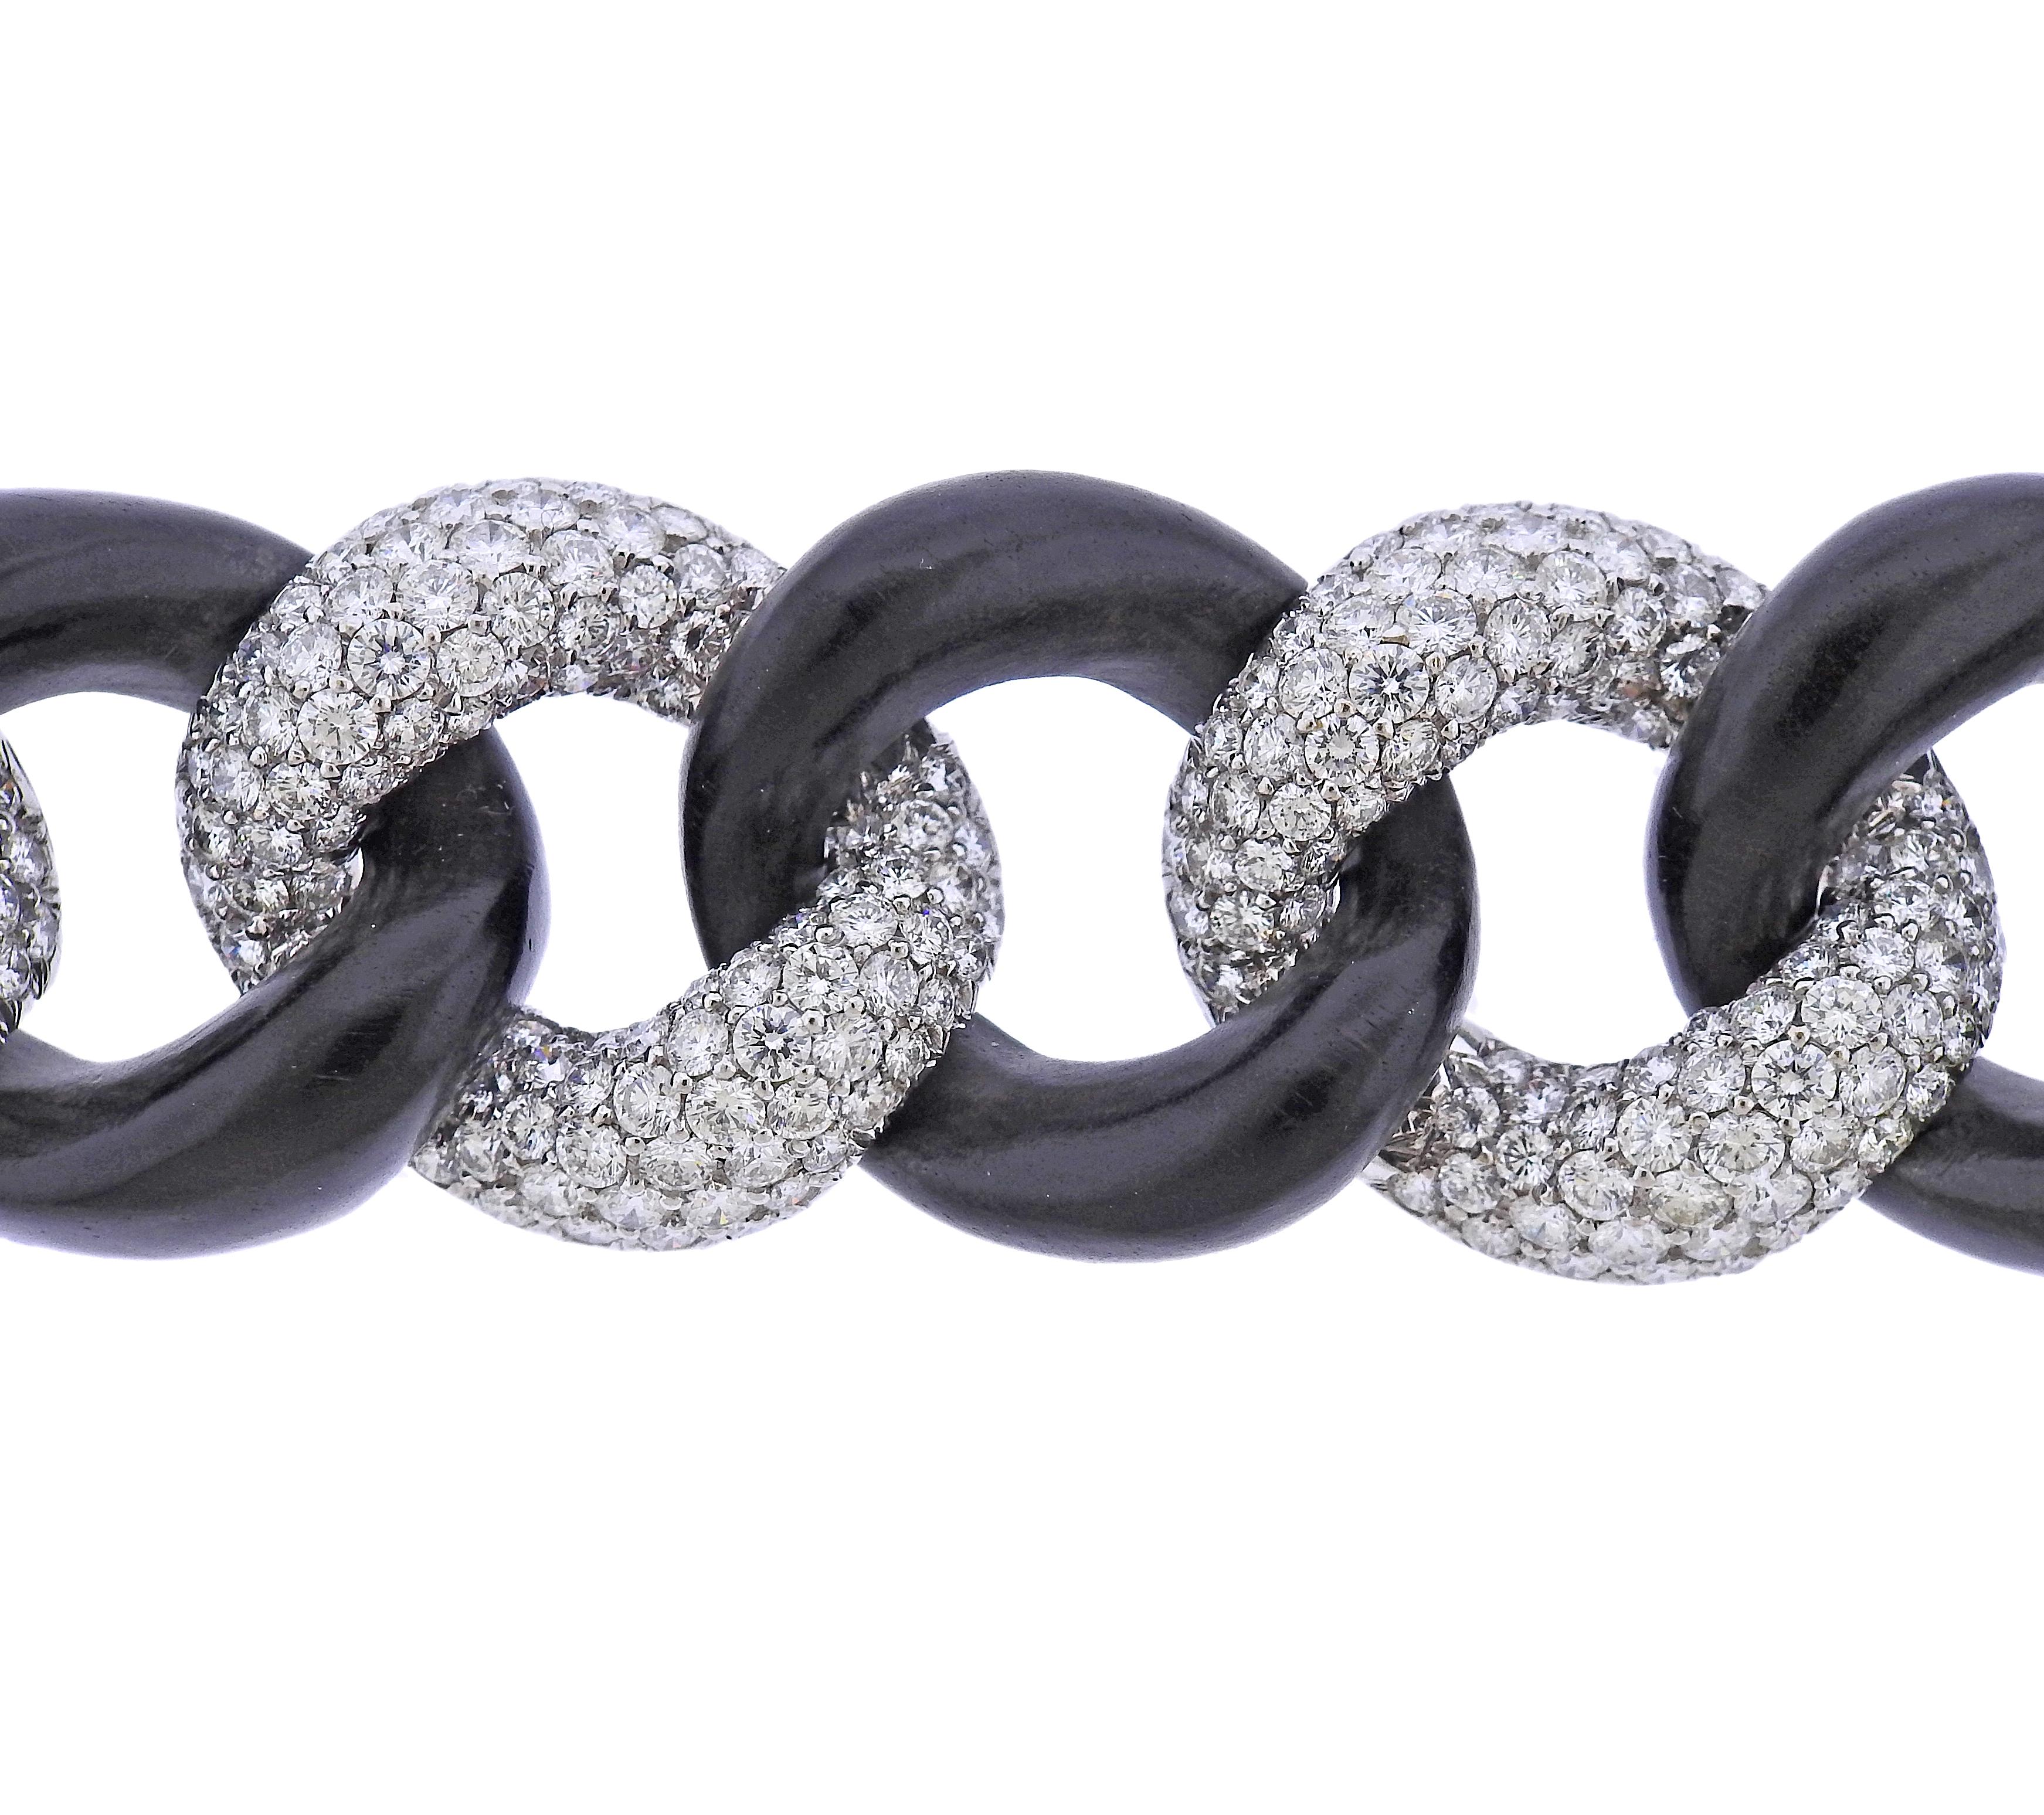 Exquisite Link bracelet by Seaman Schepps ,in 18k white gold and ebony wood, with approx. 32cts in G/VS diamonds. Retail $143,650.00. Comes with box. Bracelet is 7